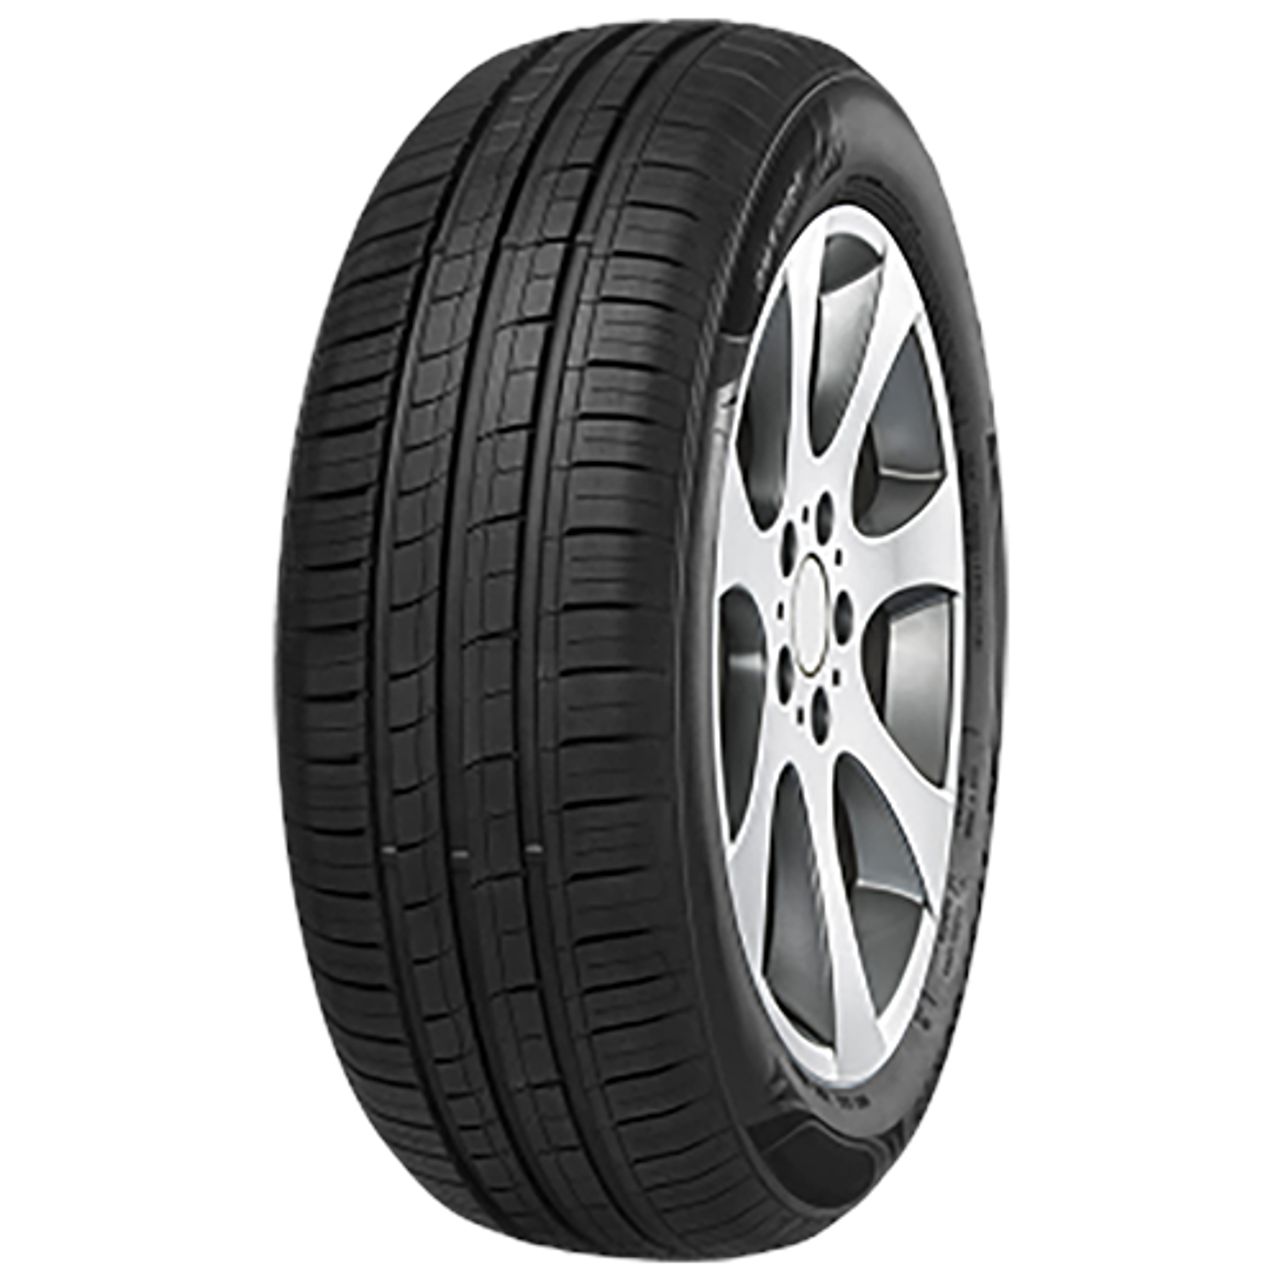 IMPERIAL ECODRIVER 4 175/65R15 84T BSW